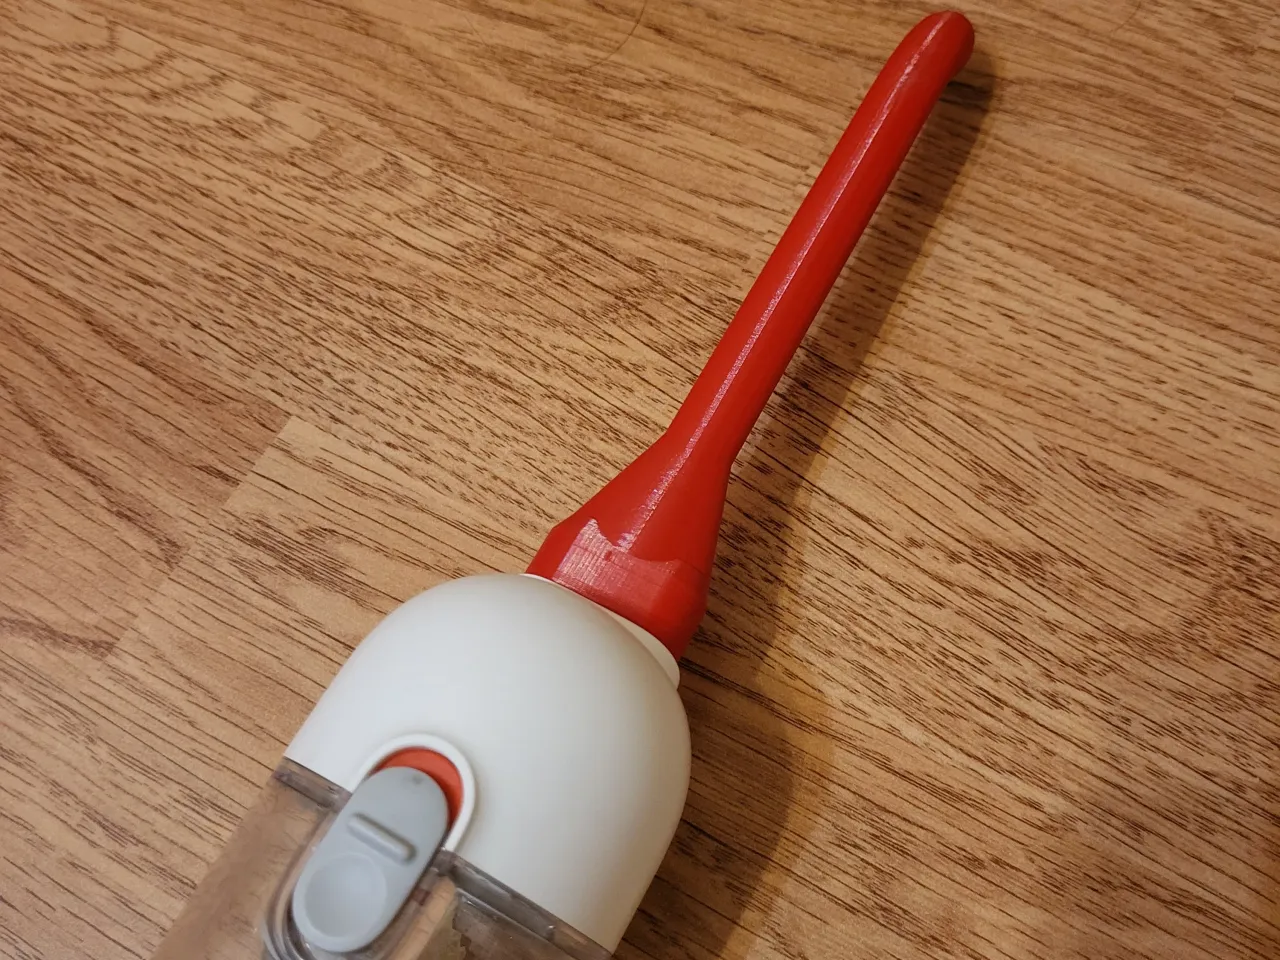 Xiaomi Mi Vacuum Cleaner mini reducer adapter 75 degree by Péter 